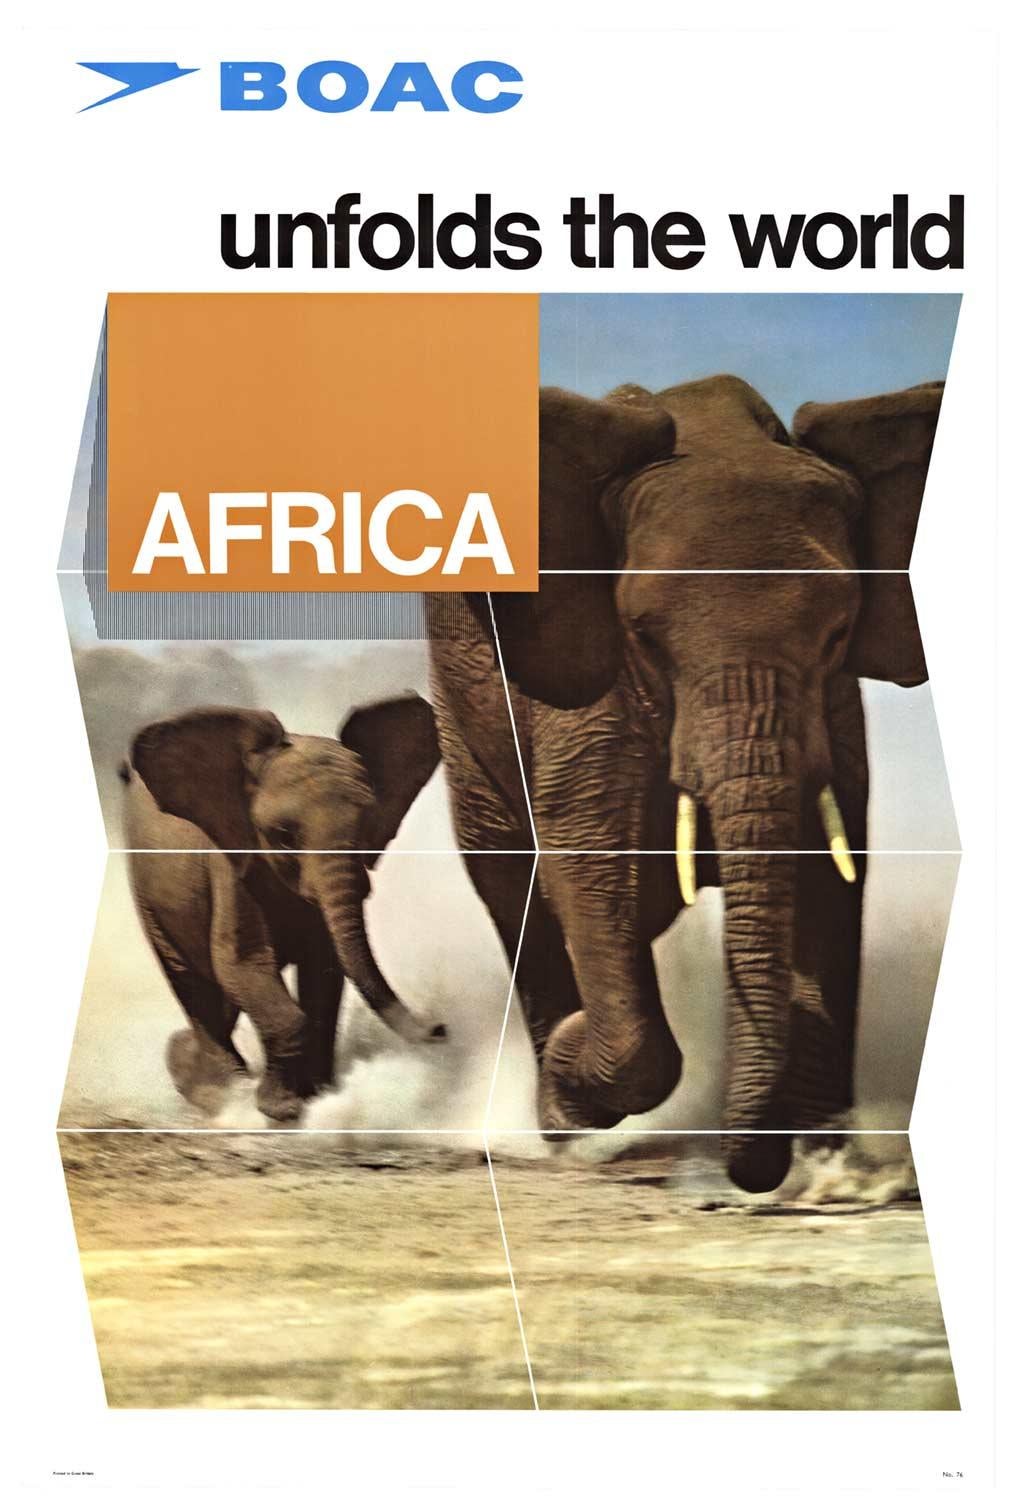 Unknown Animal Print - Original "BOAC Africa 'unfolds the world' vintage travel poster